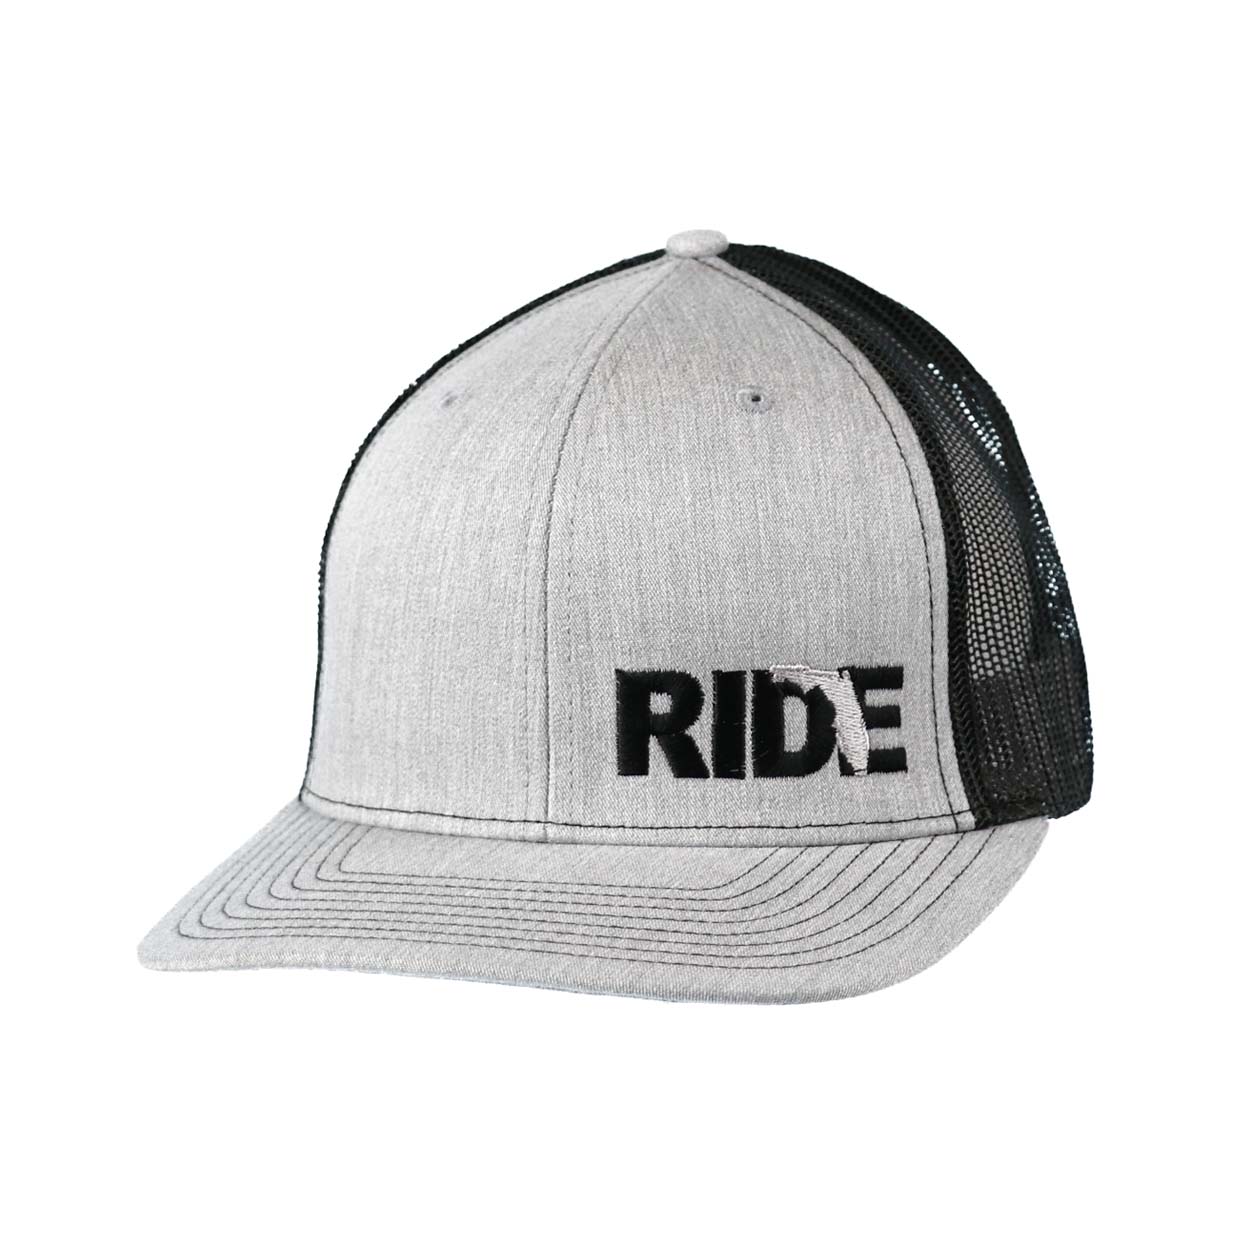 Ride Florida Night Out Embroidered Snapback Trucker Hat Heather Gray/Black